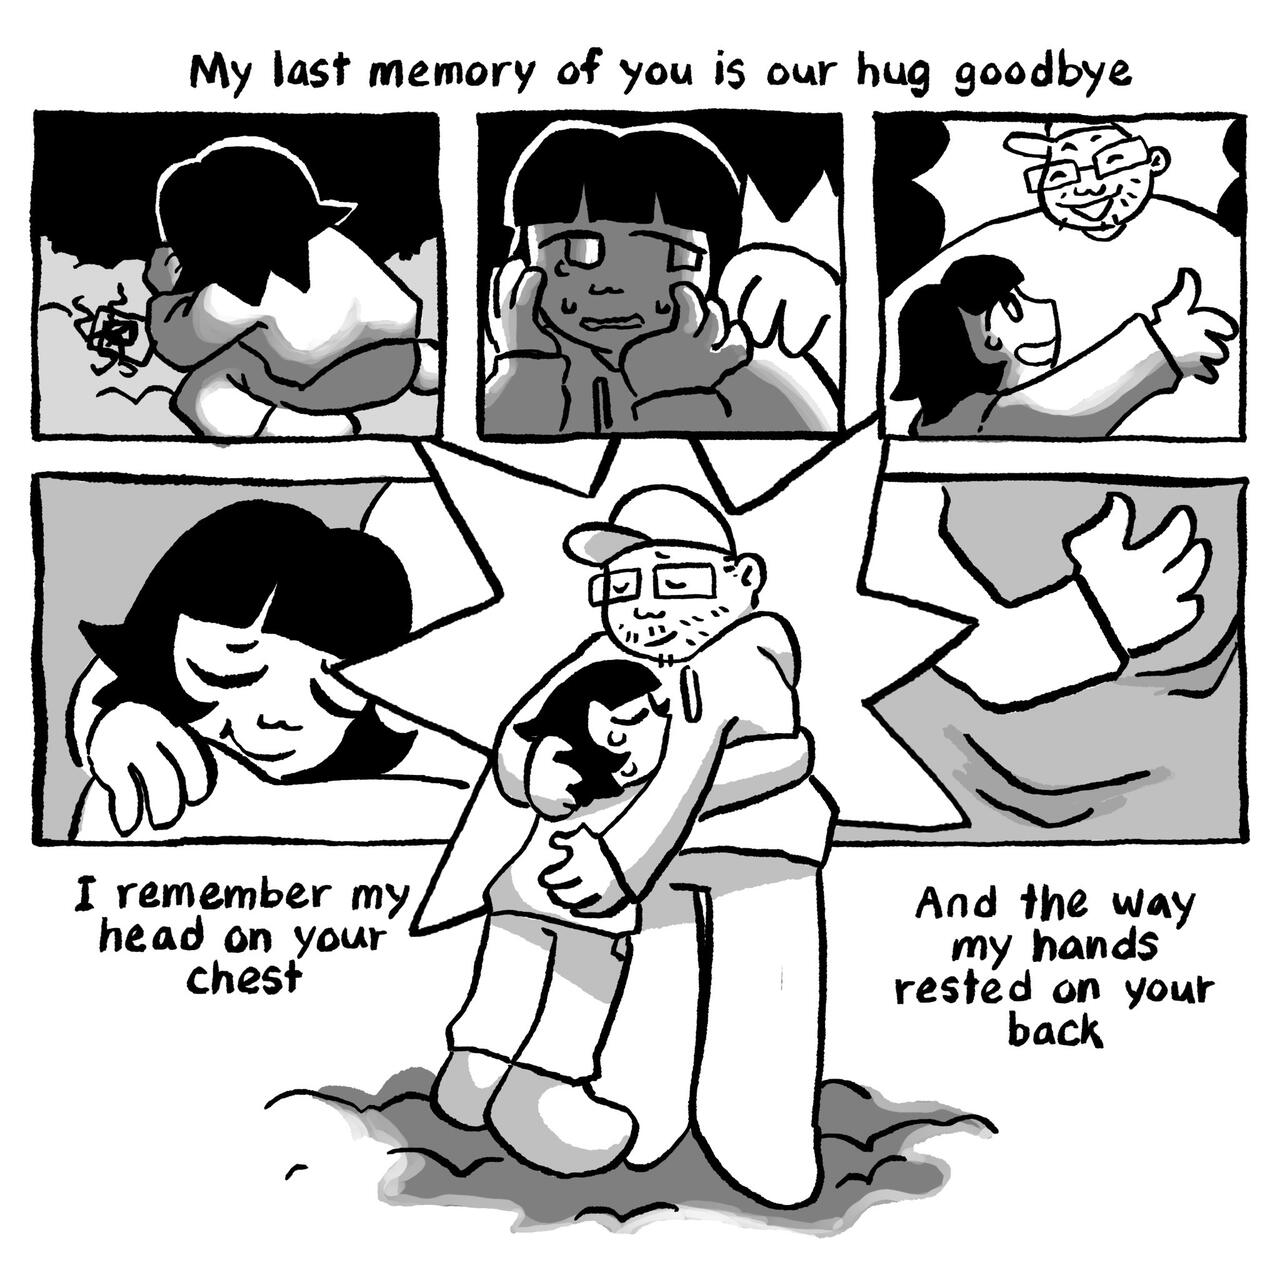 Comic; reads "My last memory of you is our hug goodbye. I remember my head on your chest. And the way my hands rested on your back."